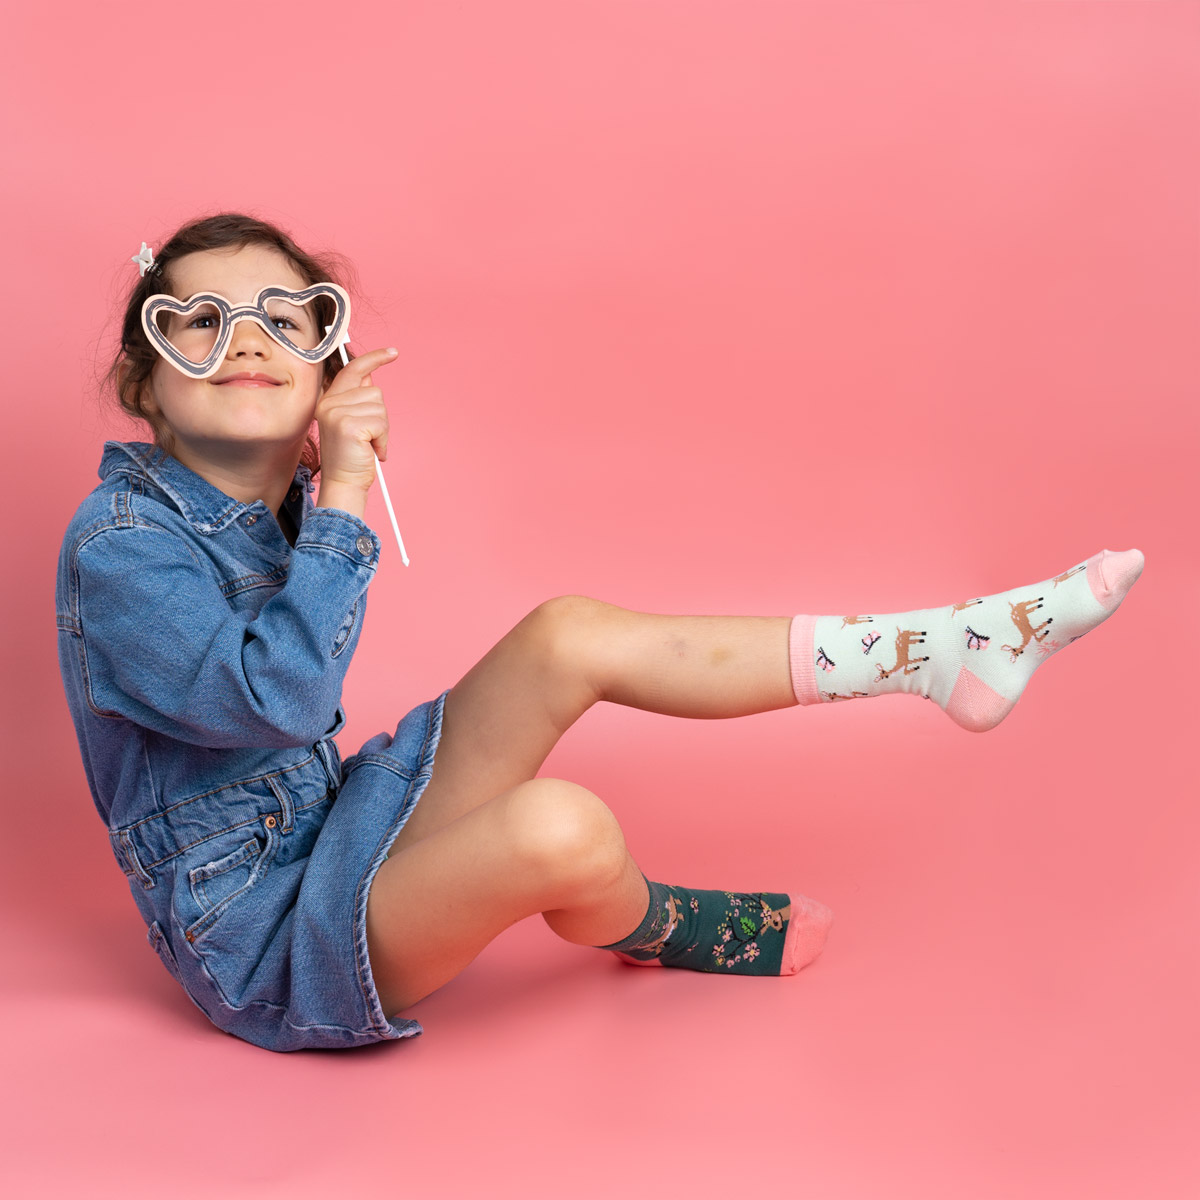 A child sitting on a pink backdrop, while holding out one foot in the air.